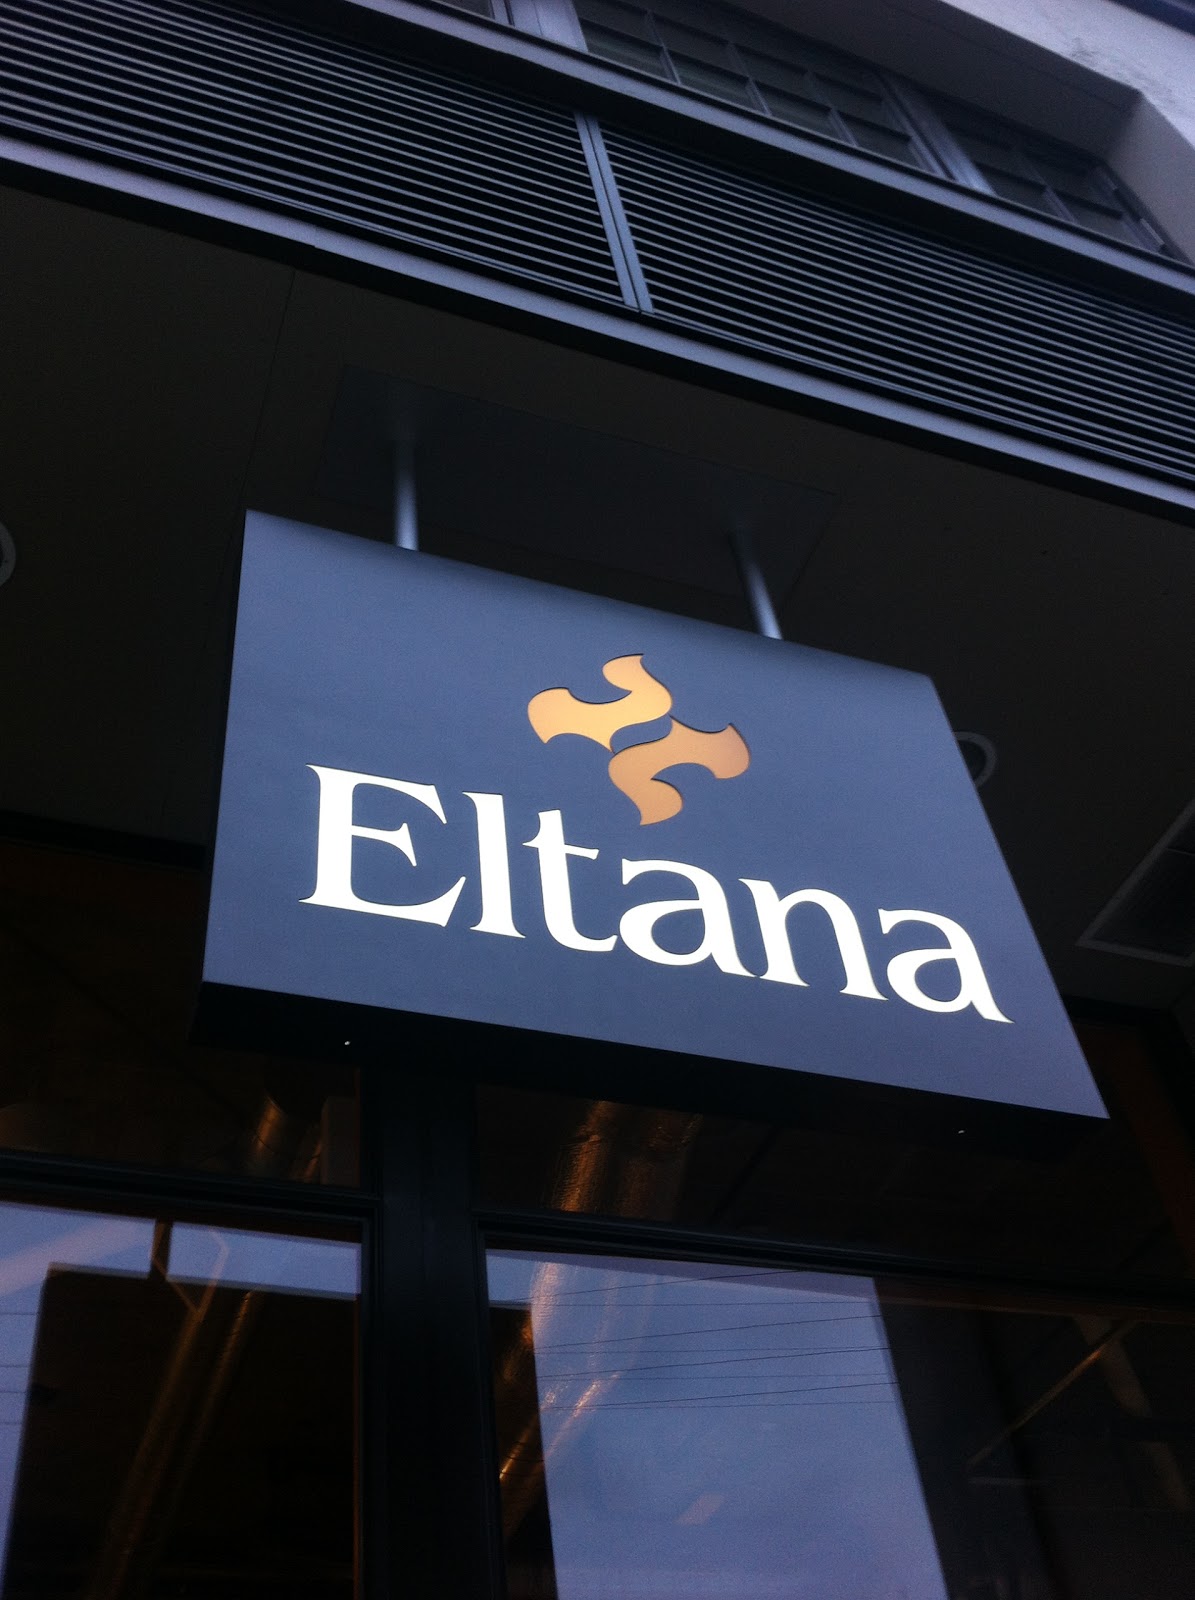 NooN's Blog: Breakfast at Eltana (wood fired bagel cafe) - Seattle